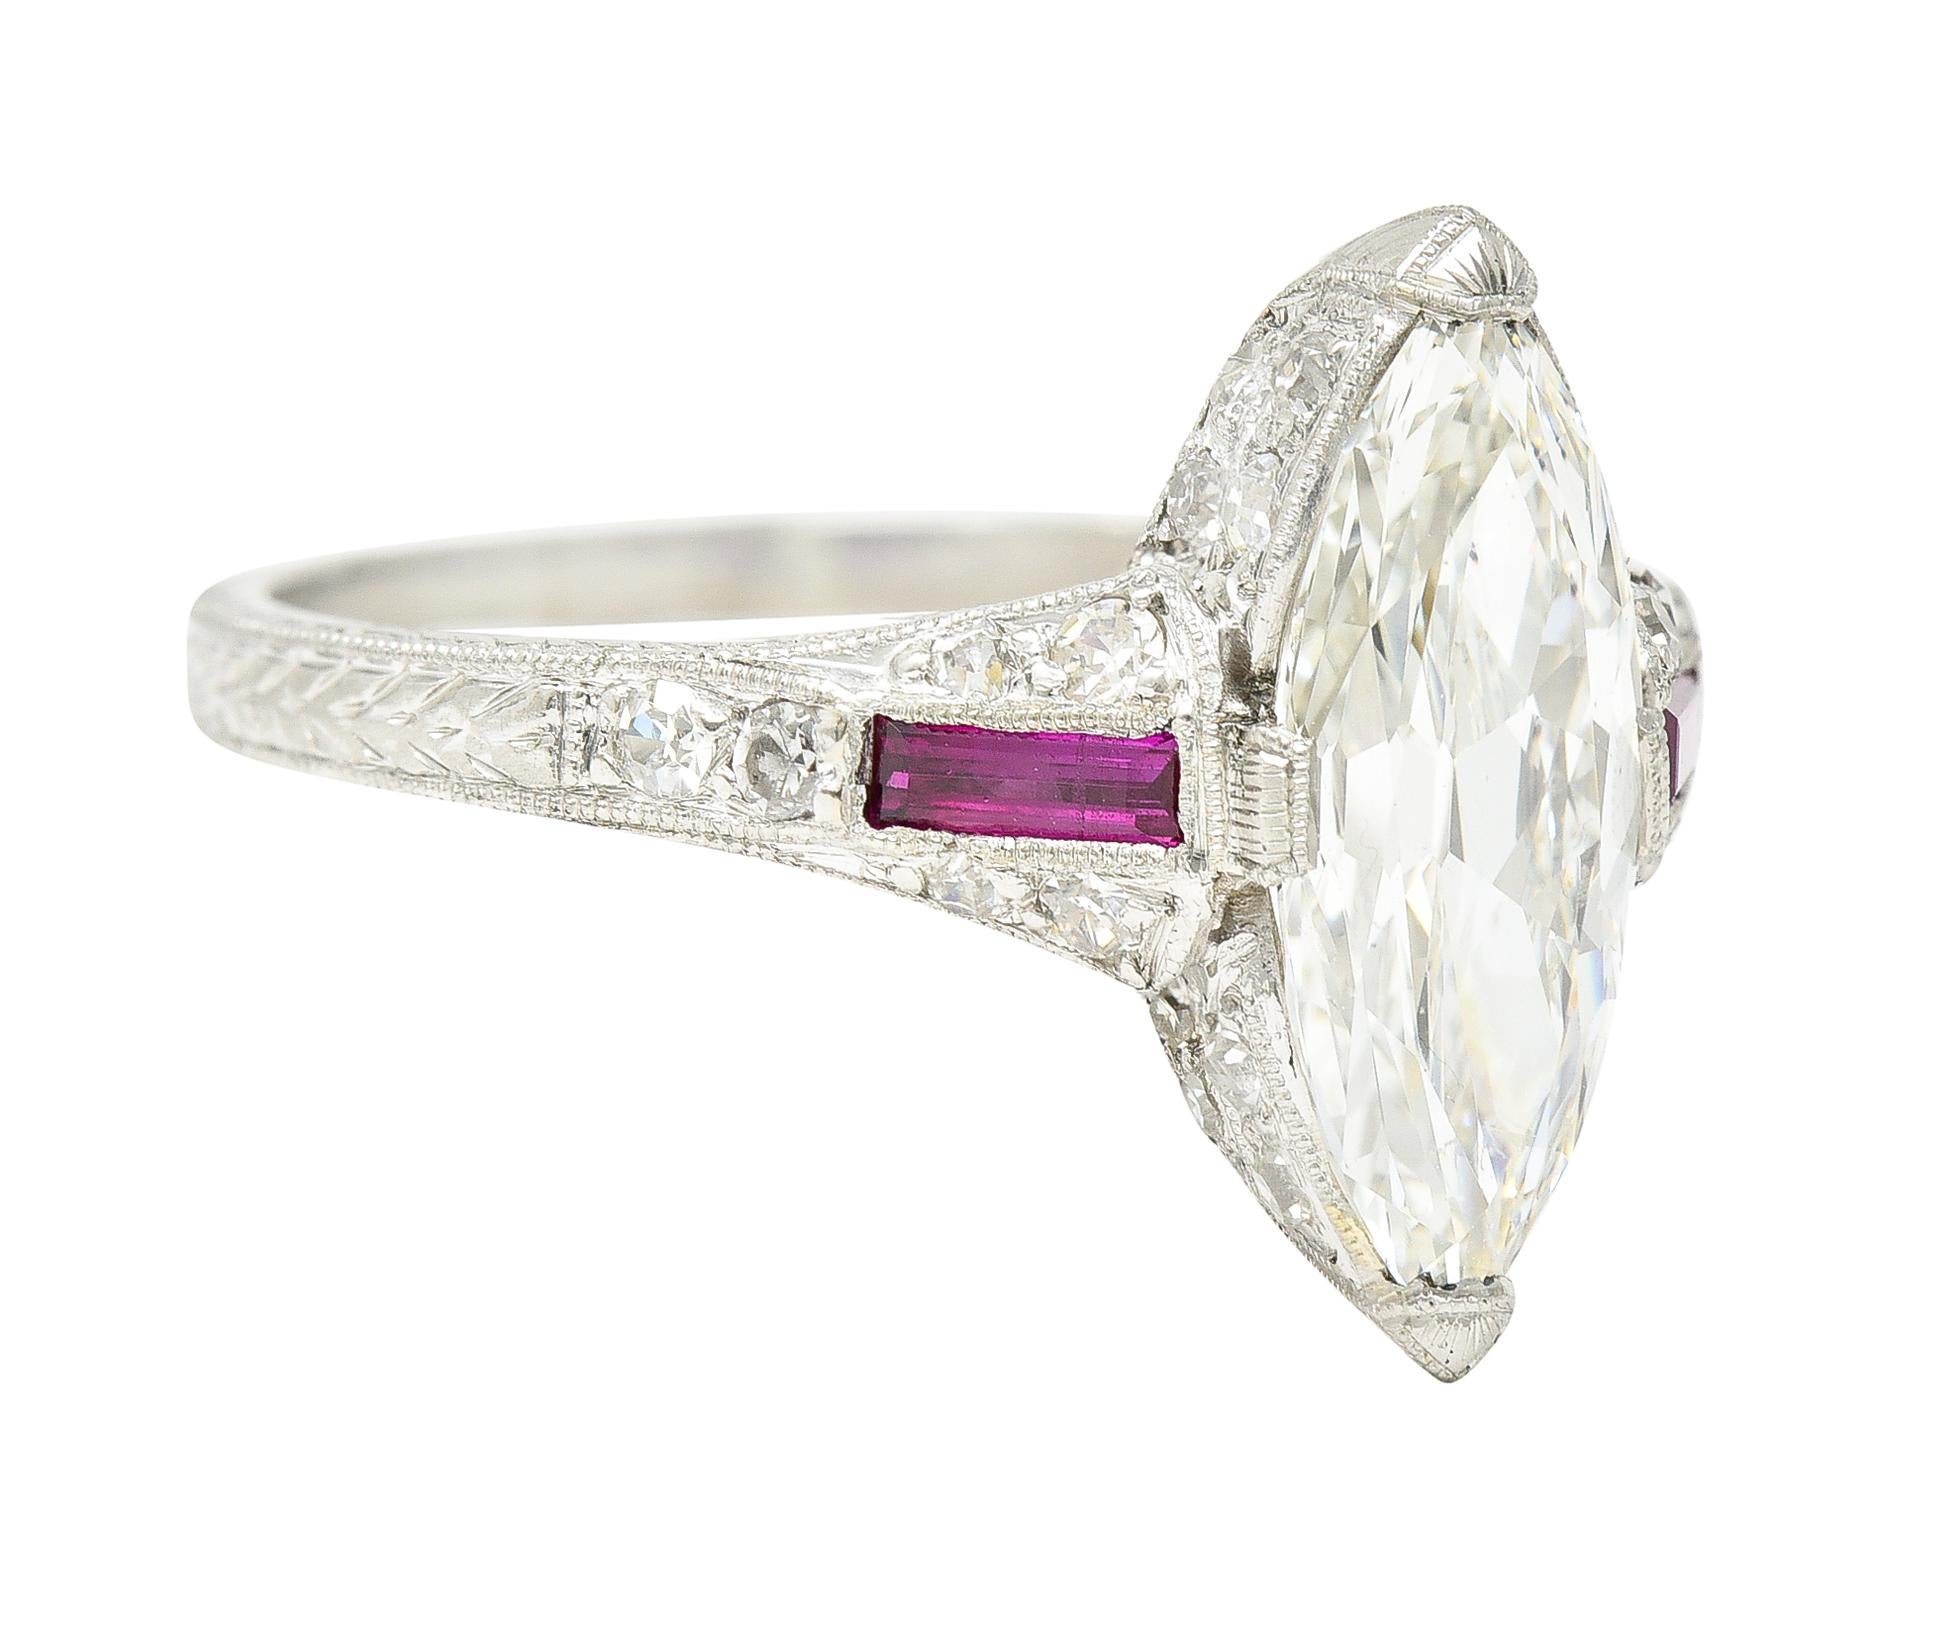 Centering a marquise cut diamond weighing approximately 1.68 carats total - K color with SI1 clarity. Set with engraved tab like prongs and flanked by cathedral shoulders with baguette cut synthetic rubies. Weighing approximately 0.18 carat total -